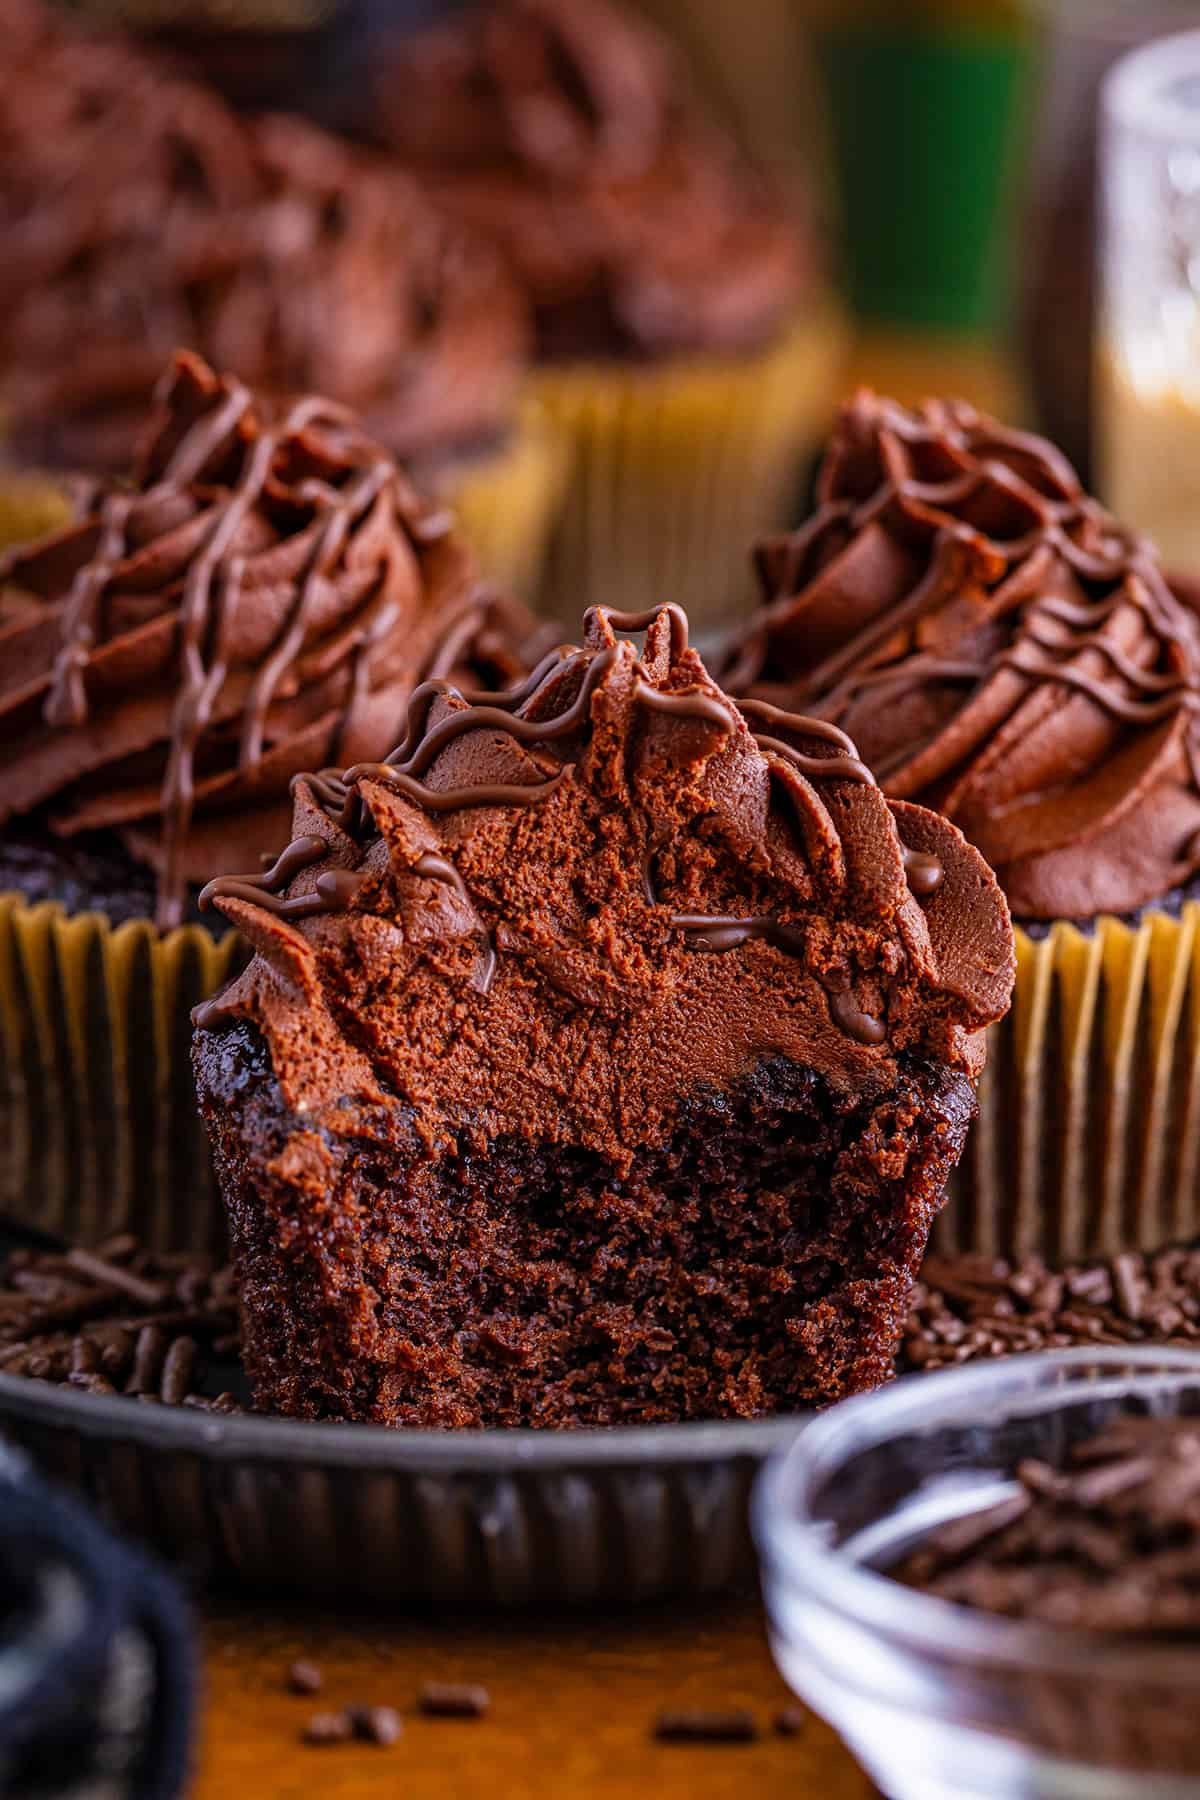 Chocolate cupcakes with swirls of Baileys frosting on a wooden surface, surrounded by dessert ingredients.